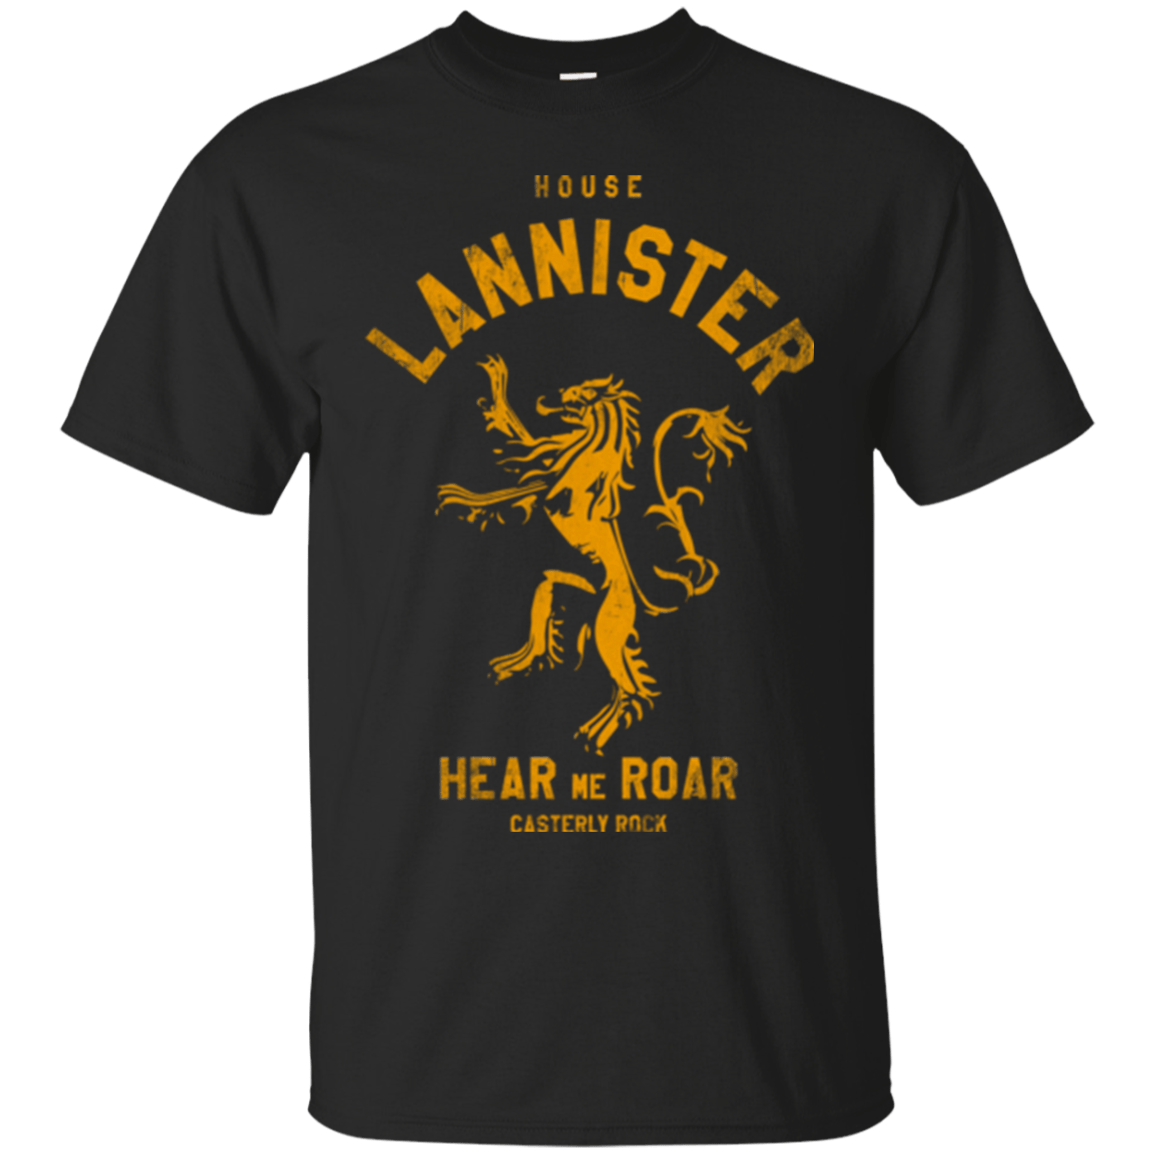 T-Shirts Black / Small House Lannister T-Shirt